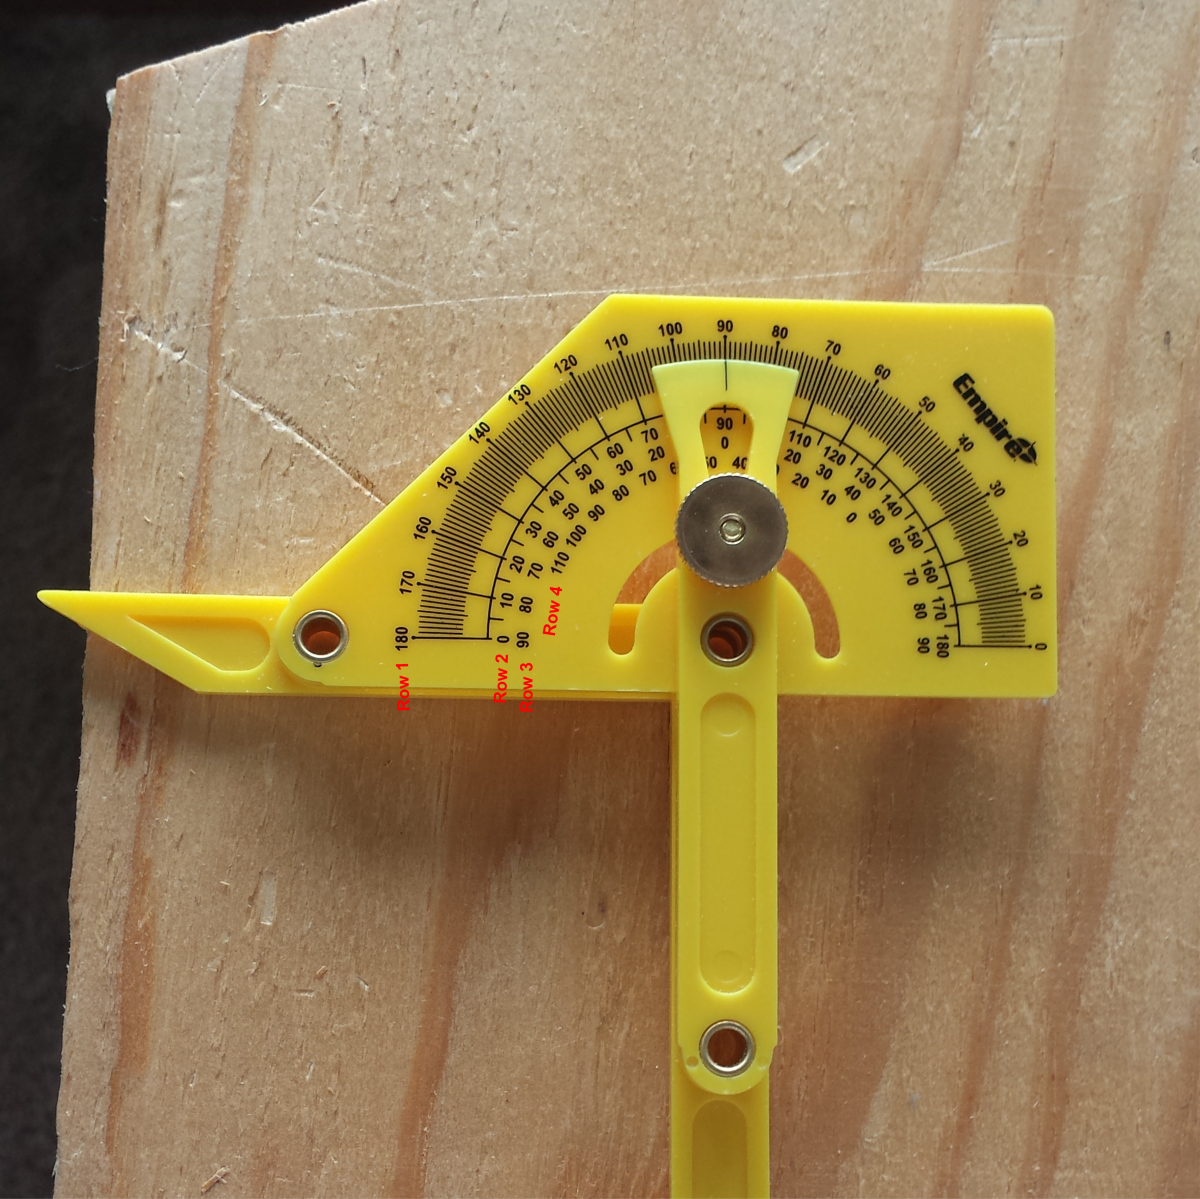 The Empire protractor is a tool used to find angles.